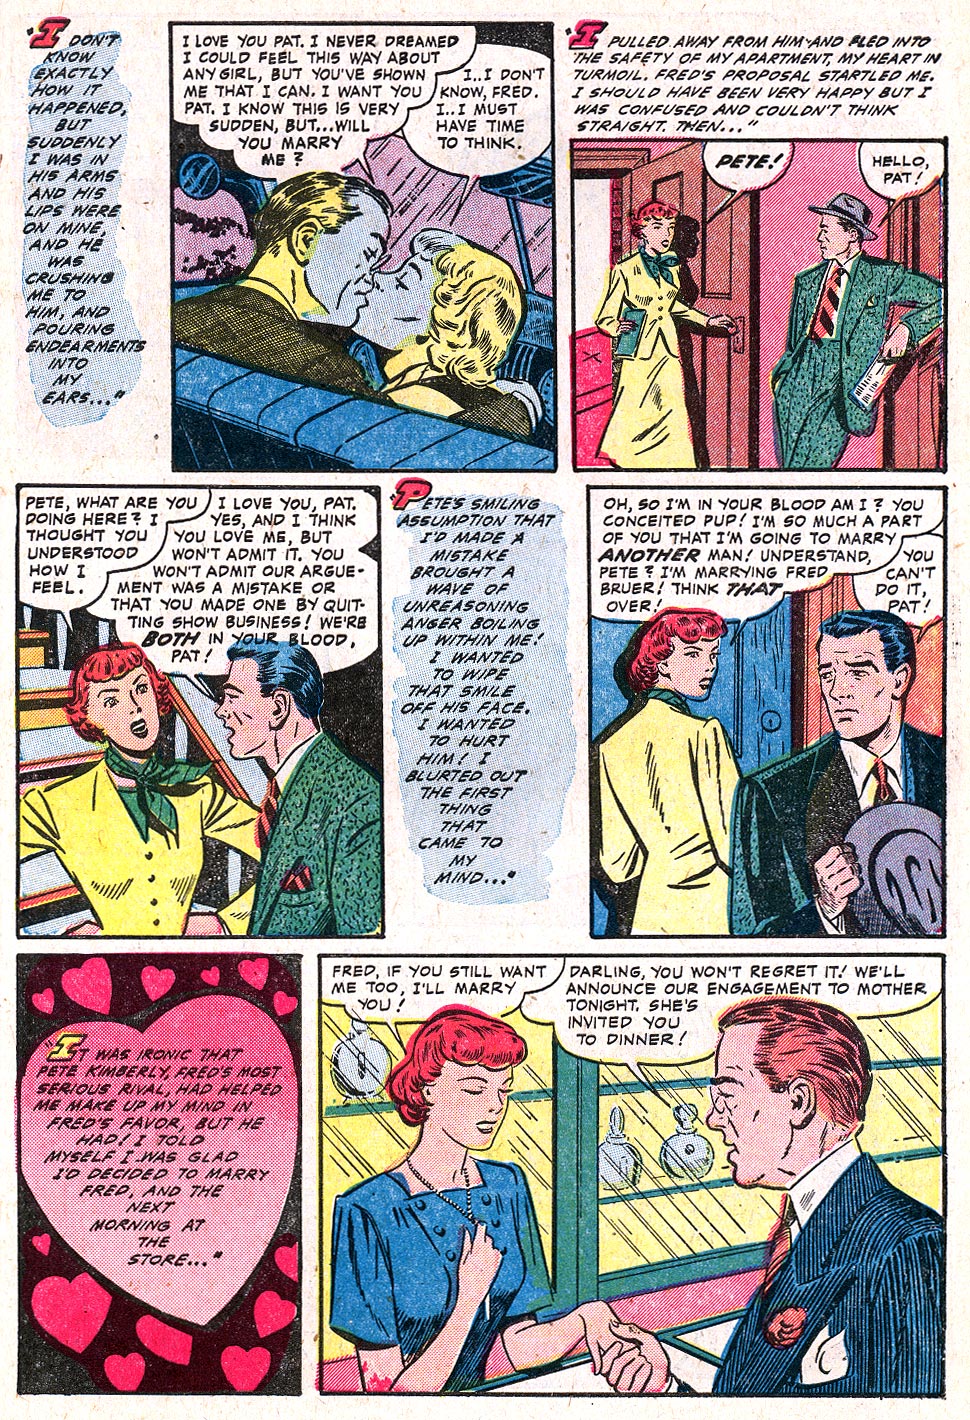 Romantic Love (1958) issue 3 - Page 7